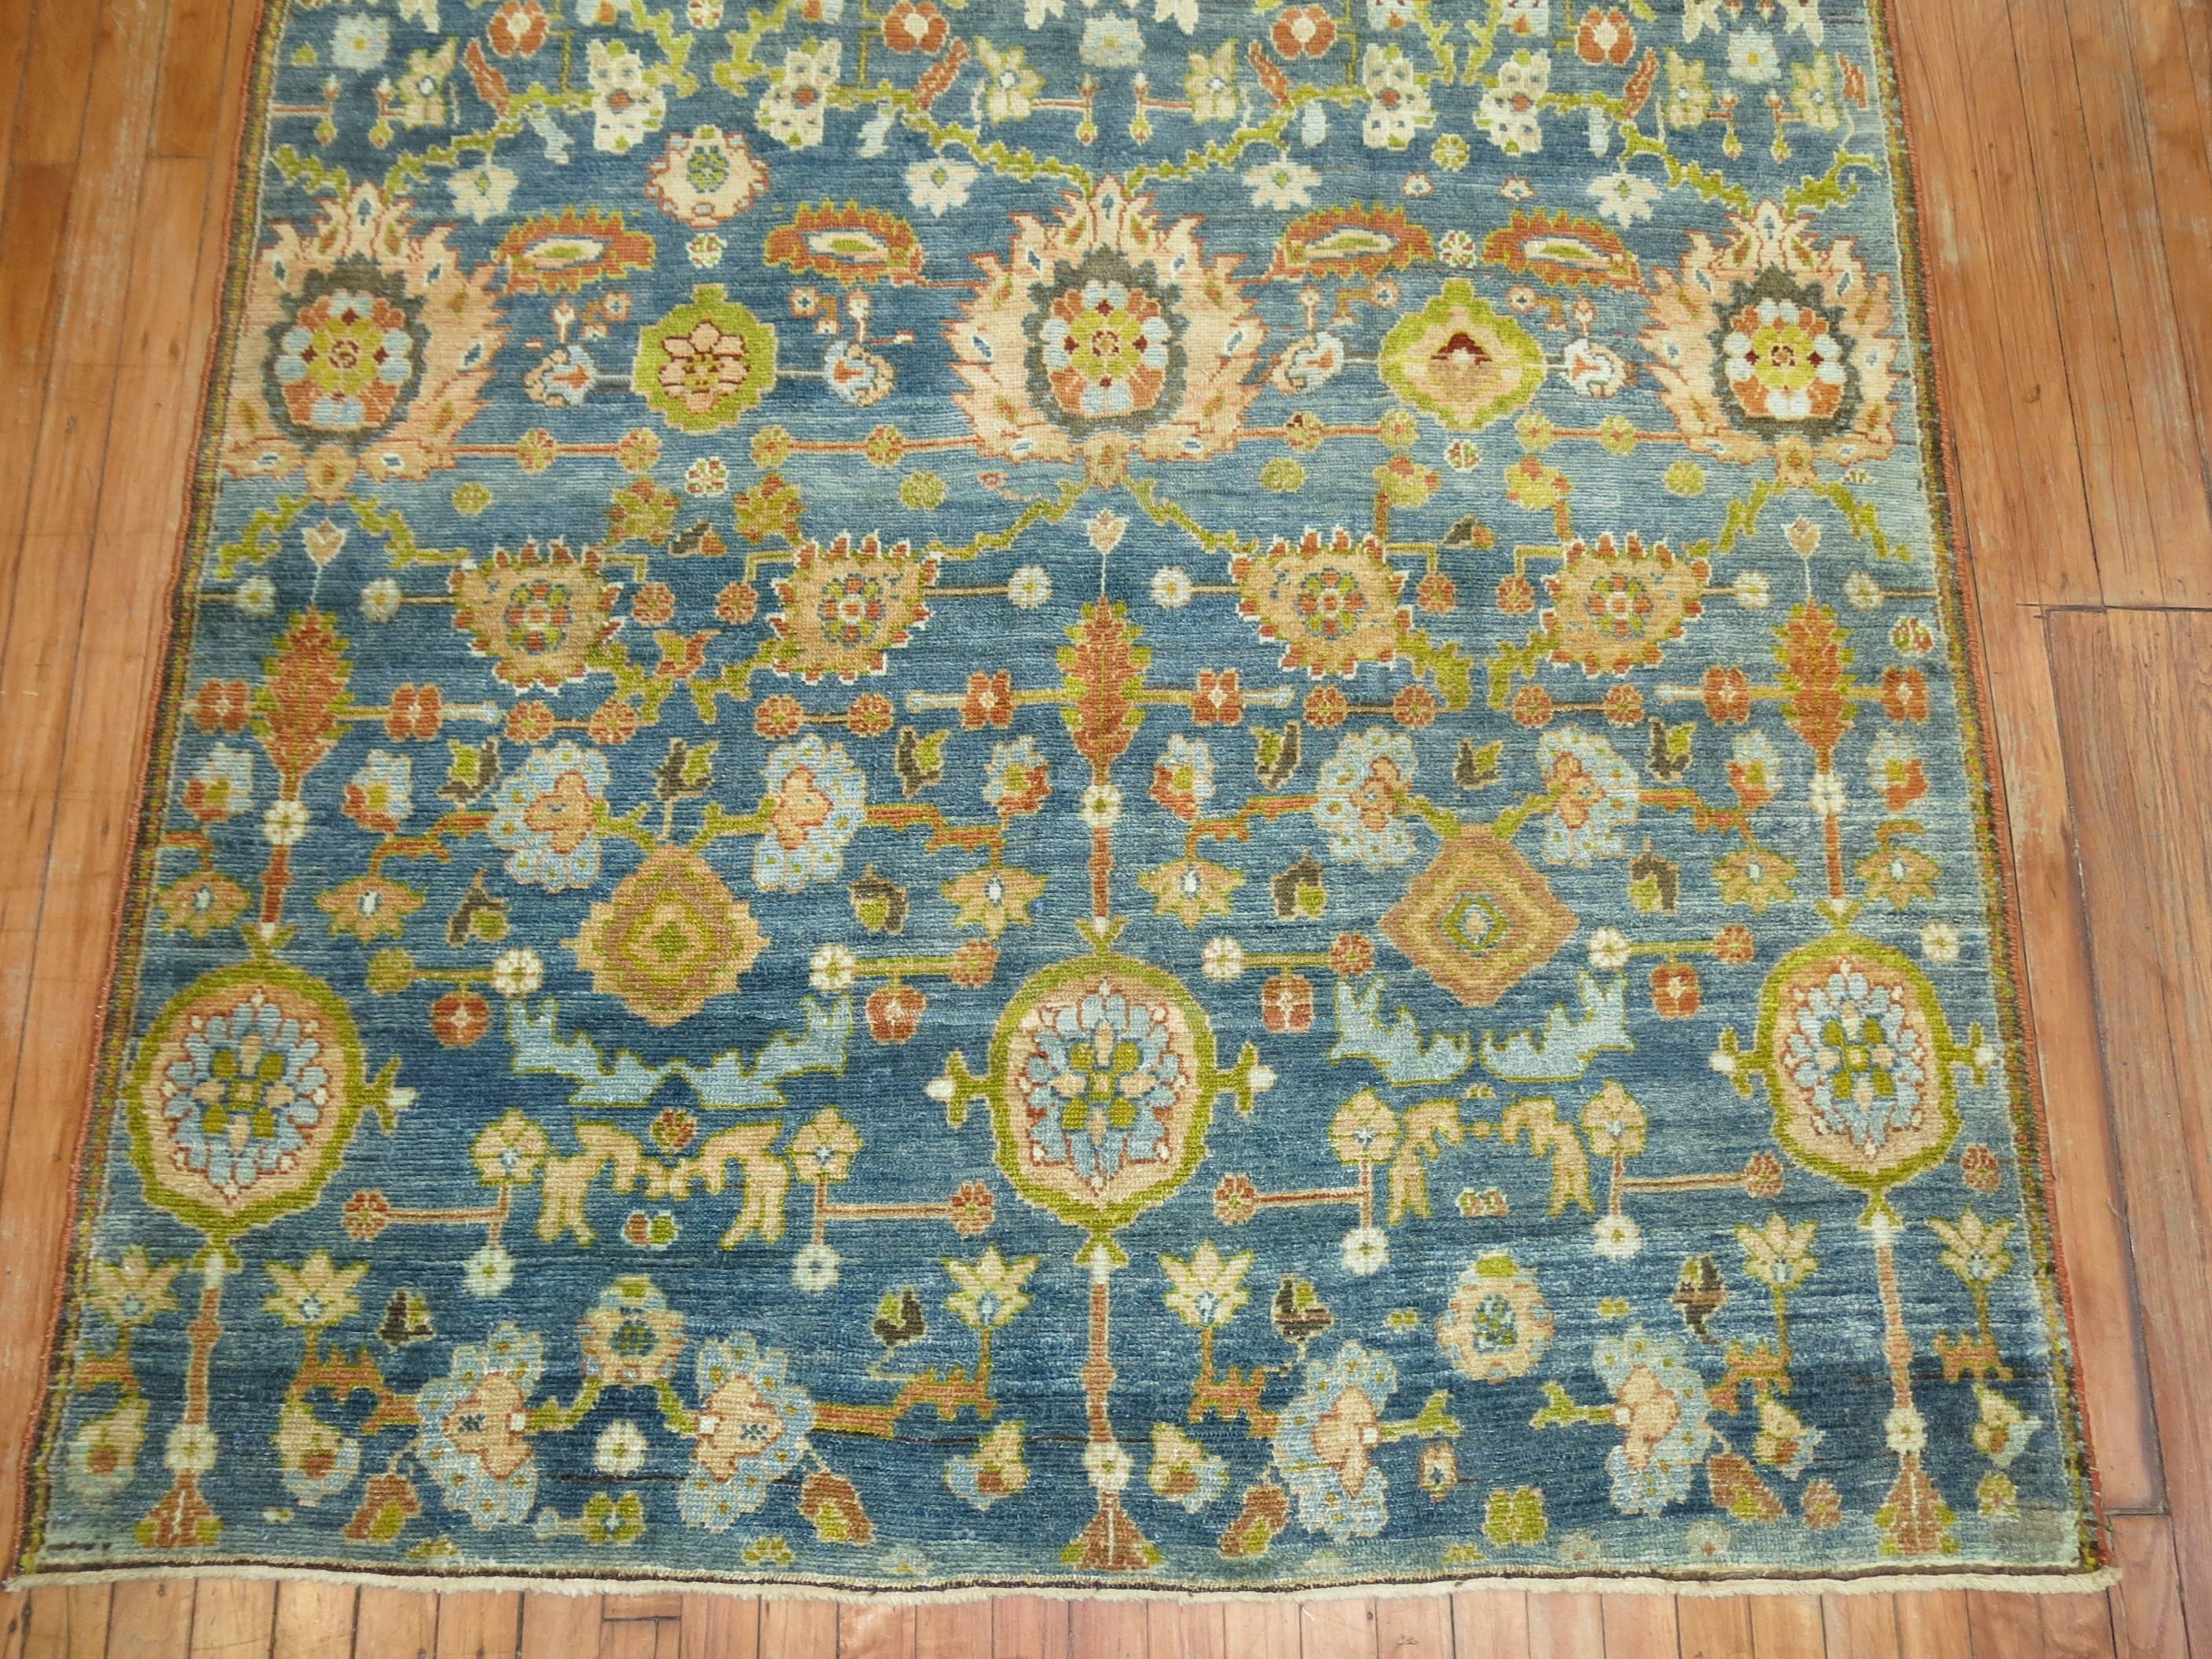 A Persian Malayer gallery rug featured a large-scale all-over design.